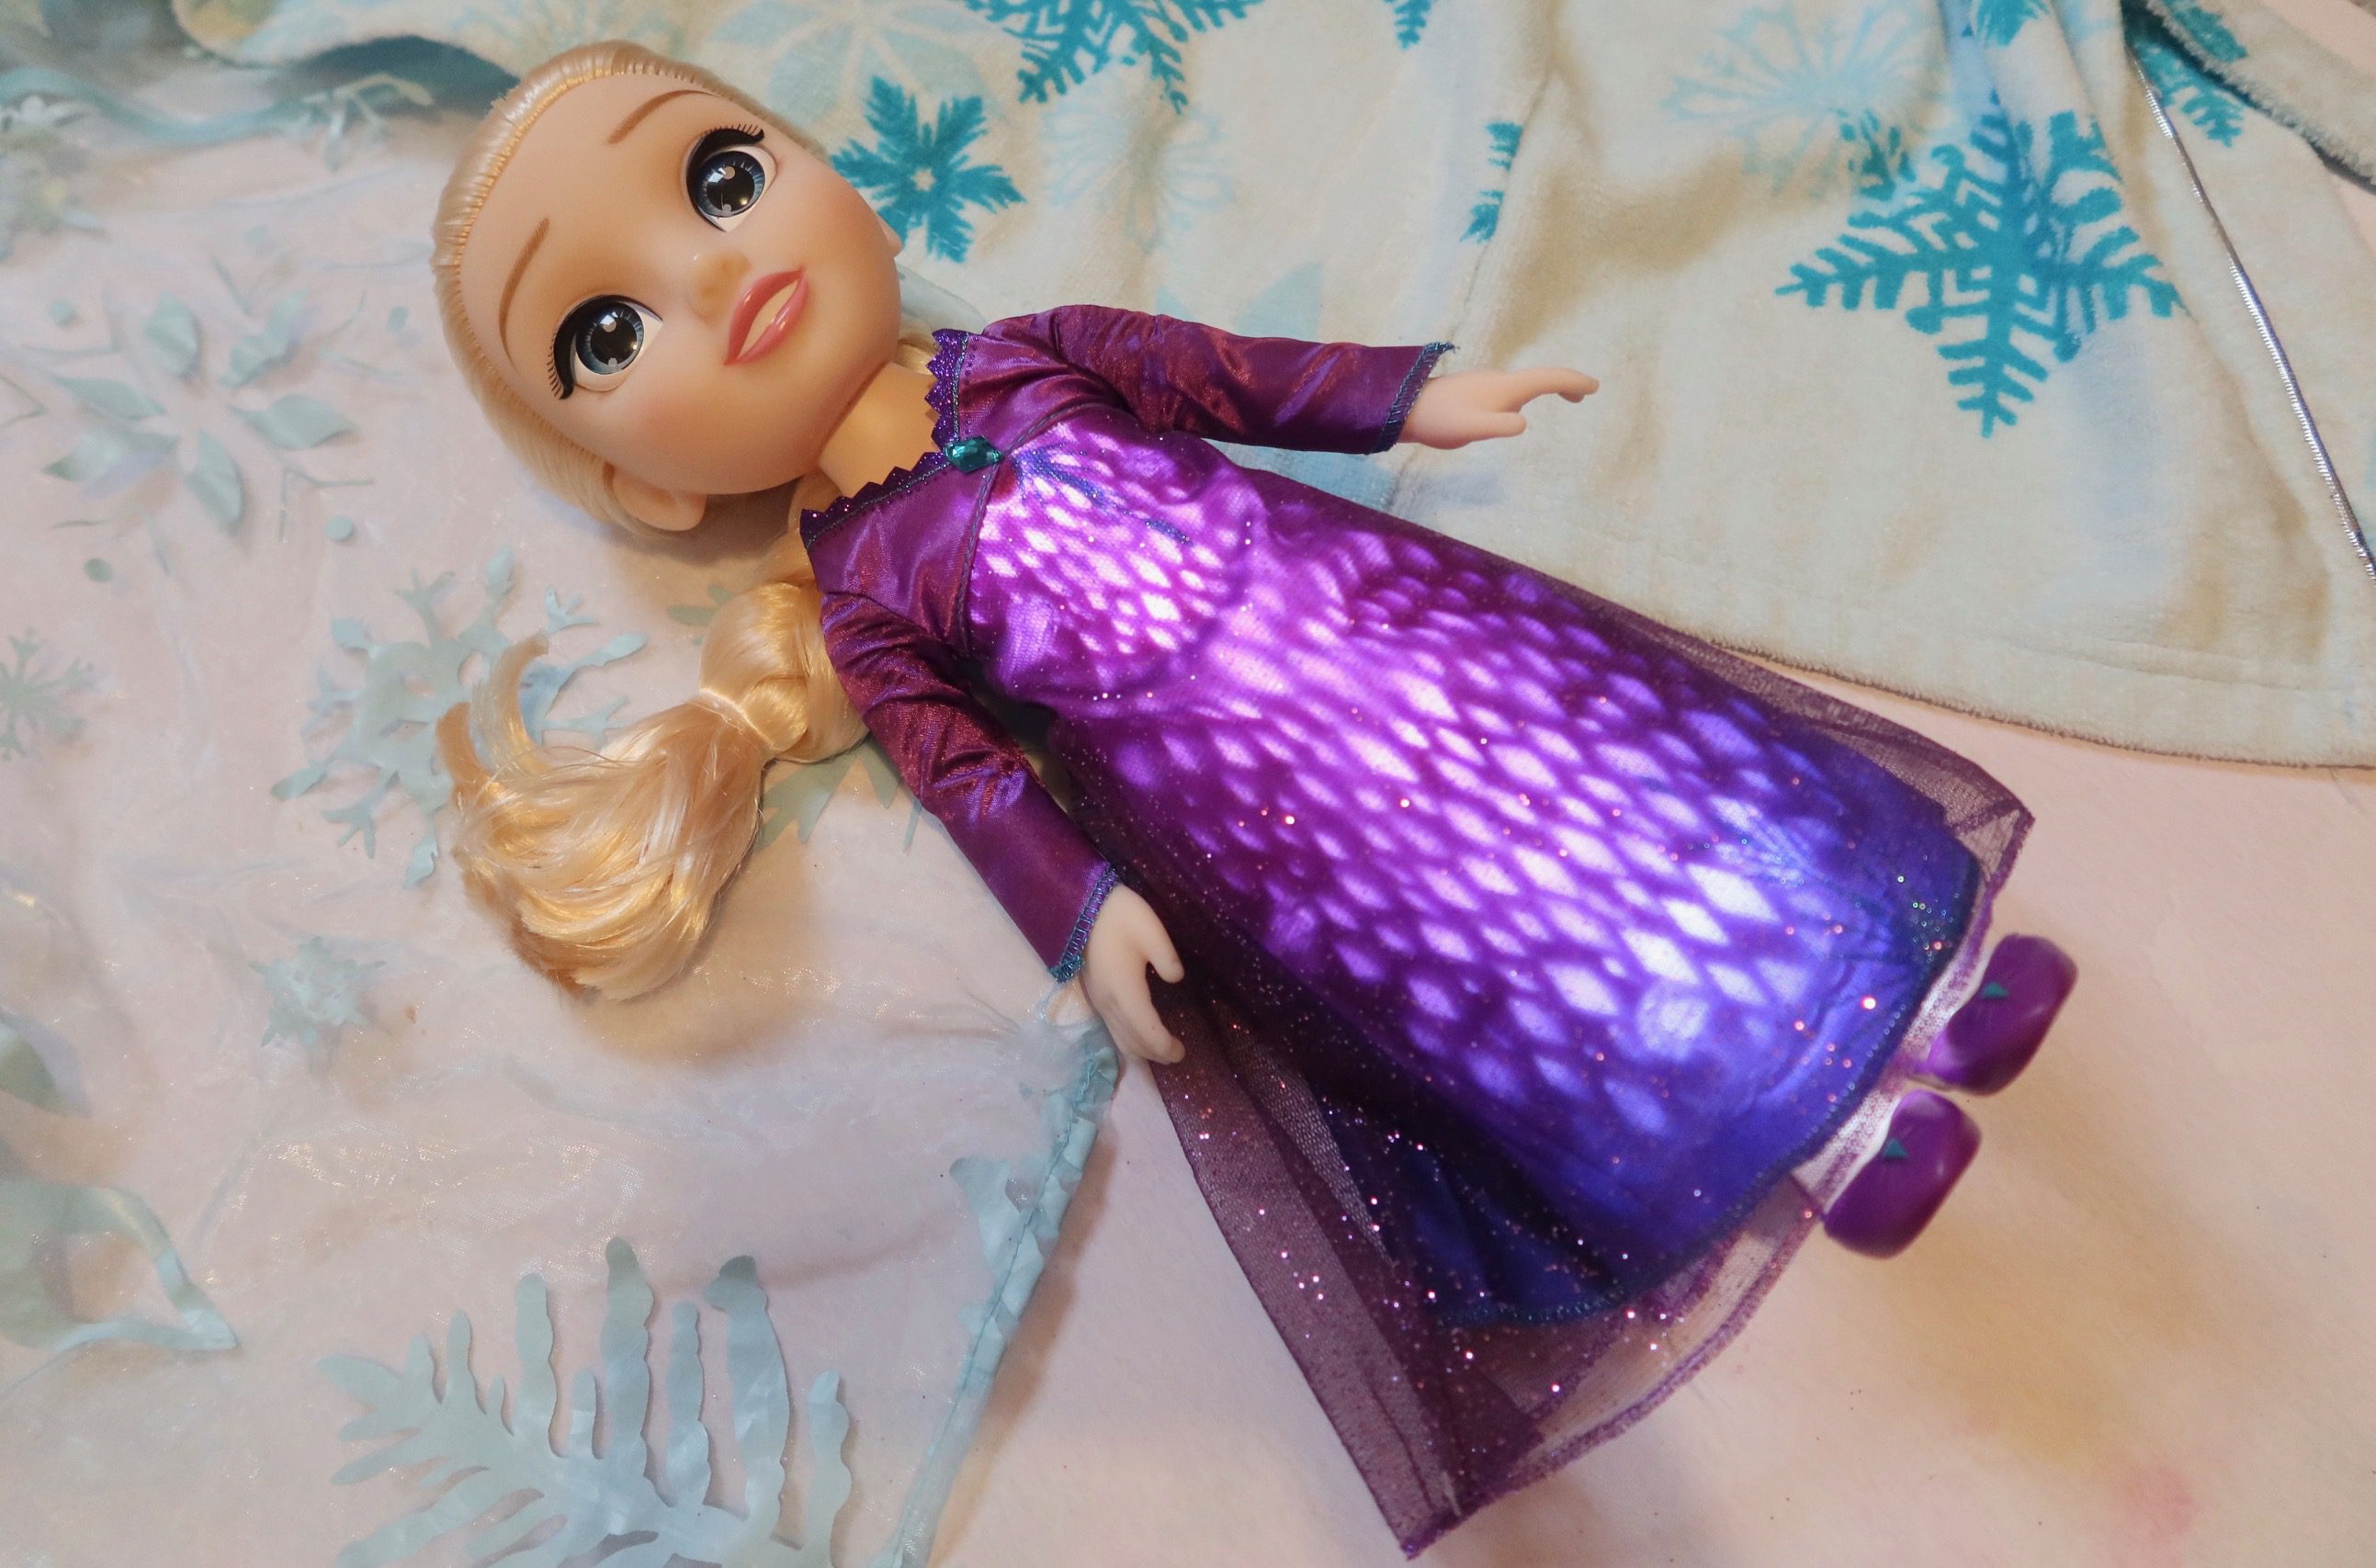 REVIEW -“Into the Unknown” Frozen 2 Singing Elsa Doll